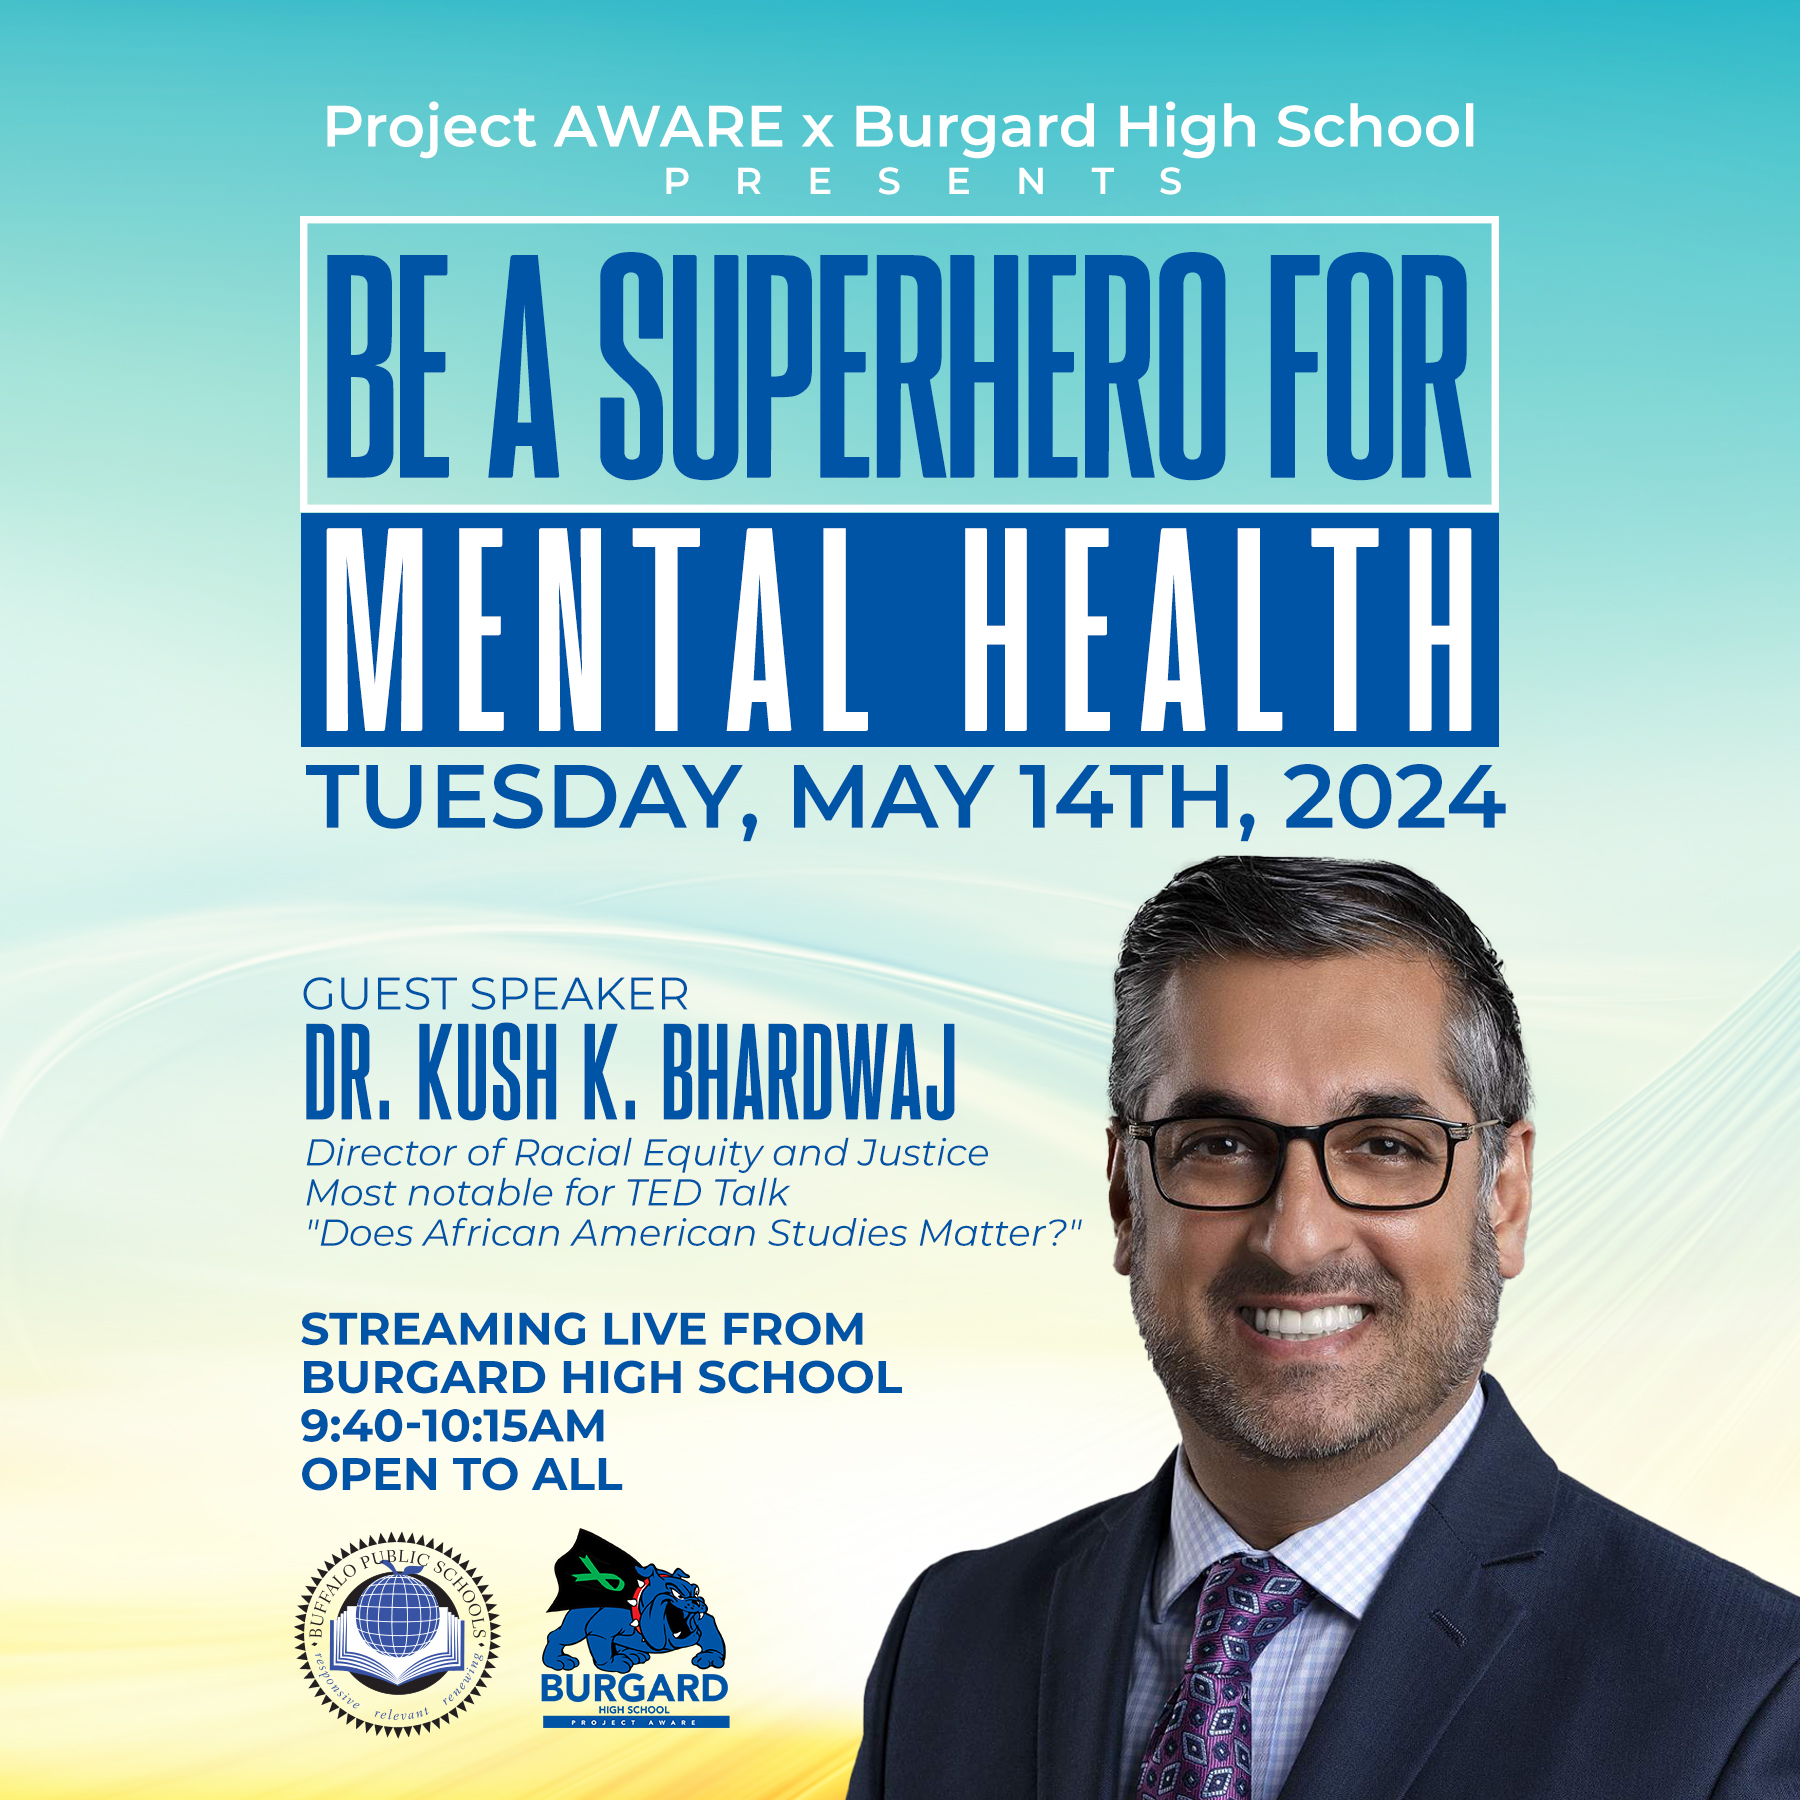 Be a Superhero for Mental Health Tuesday, May 14th, 2024